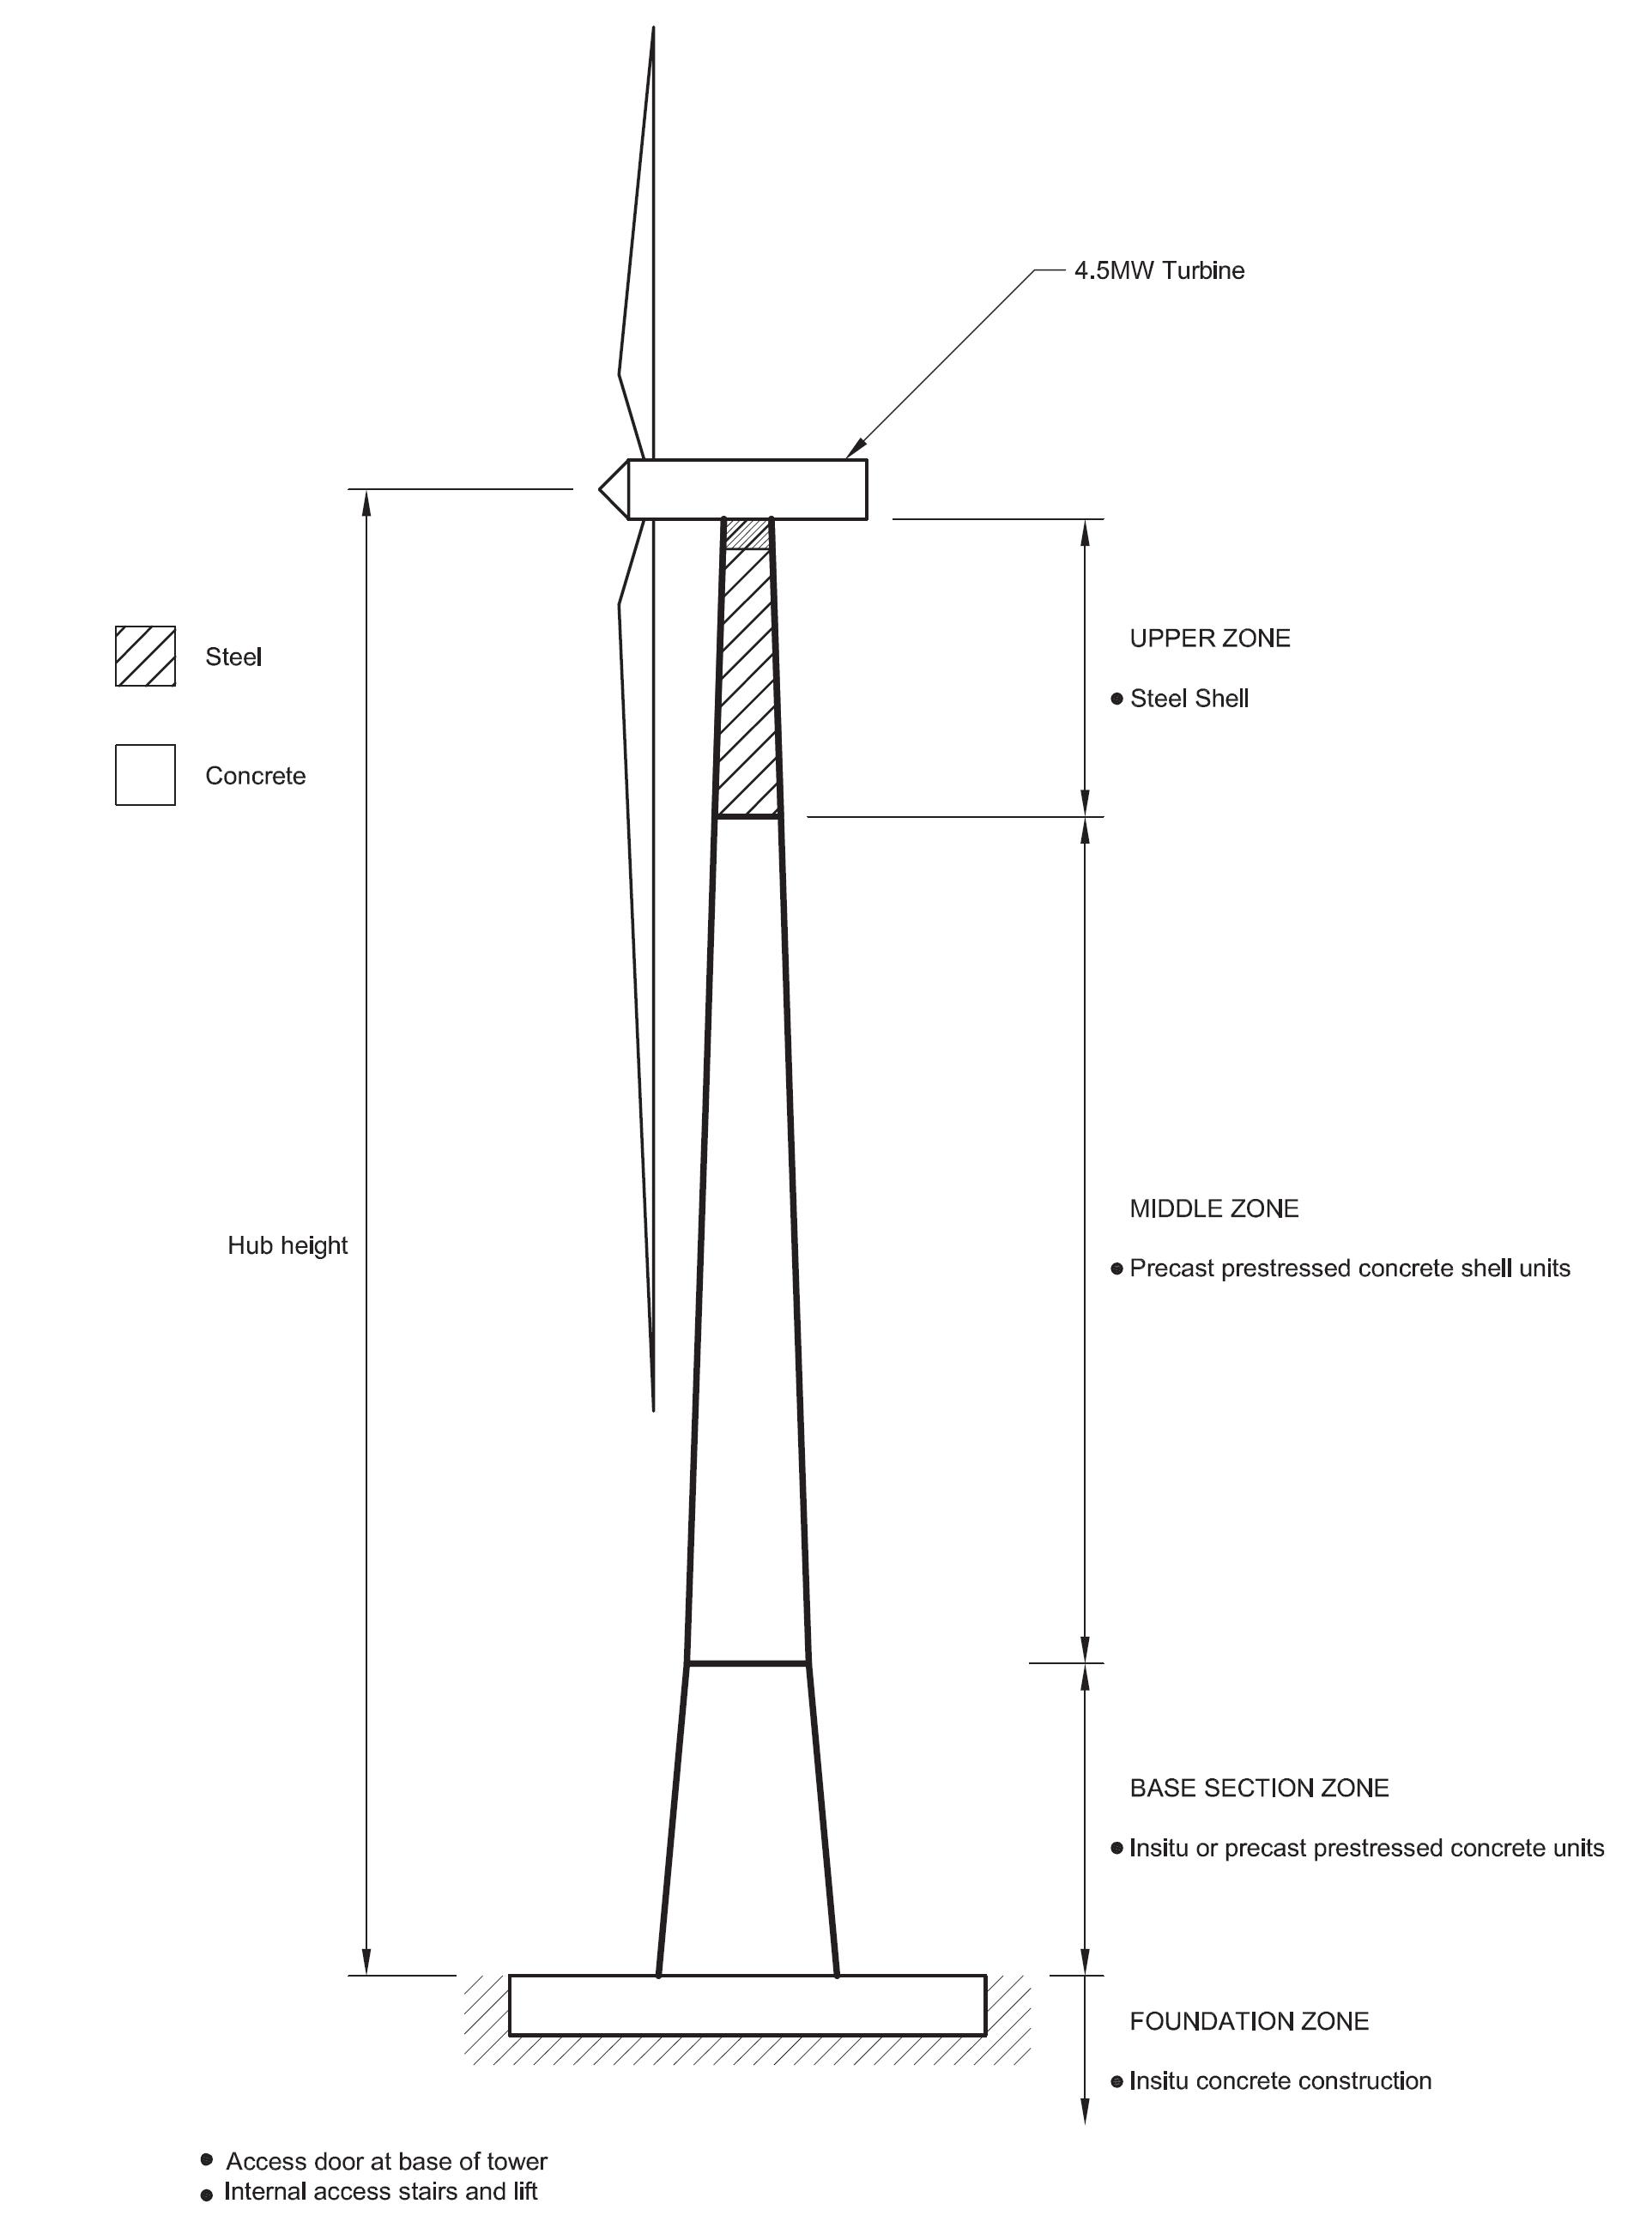 Competitive_Concrete_Foundations_for_Offshore_Wind_Turbines